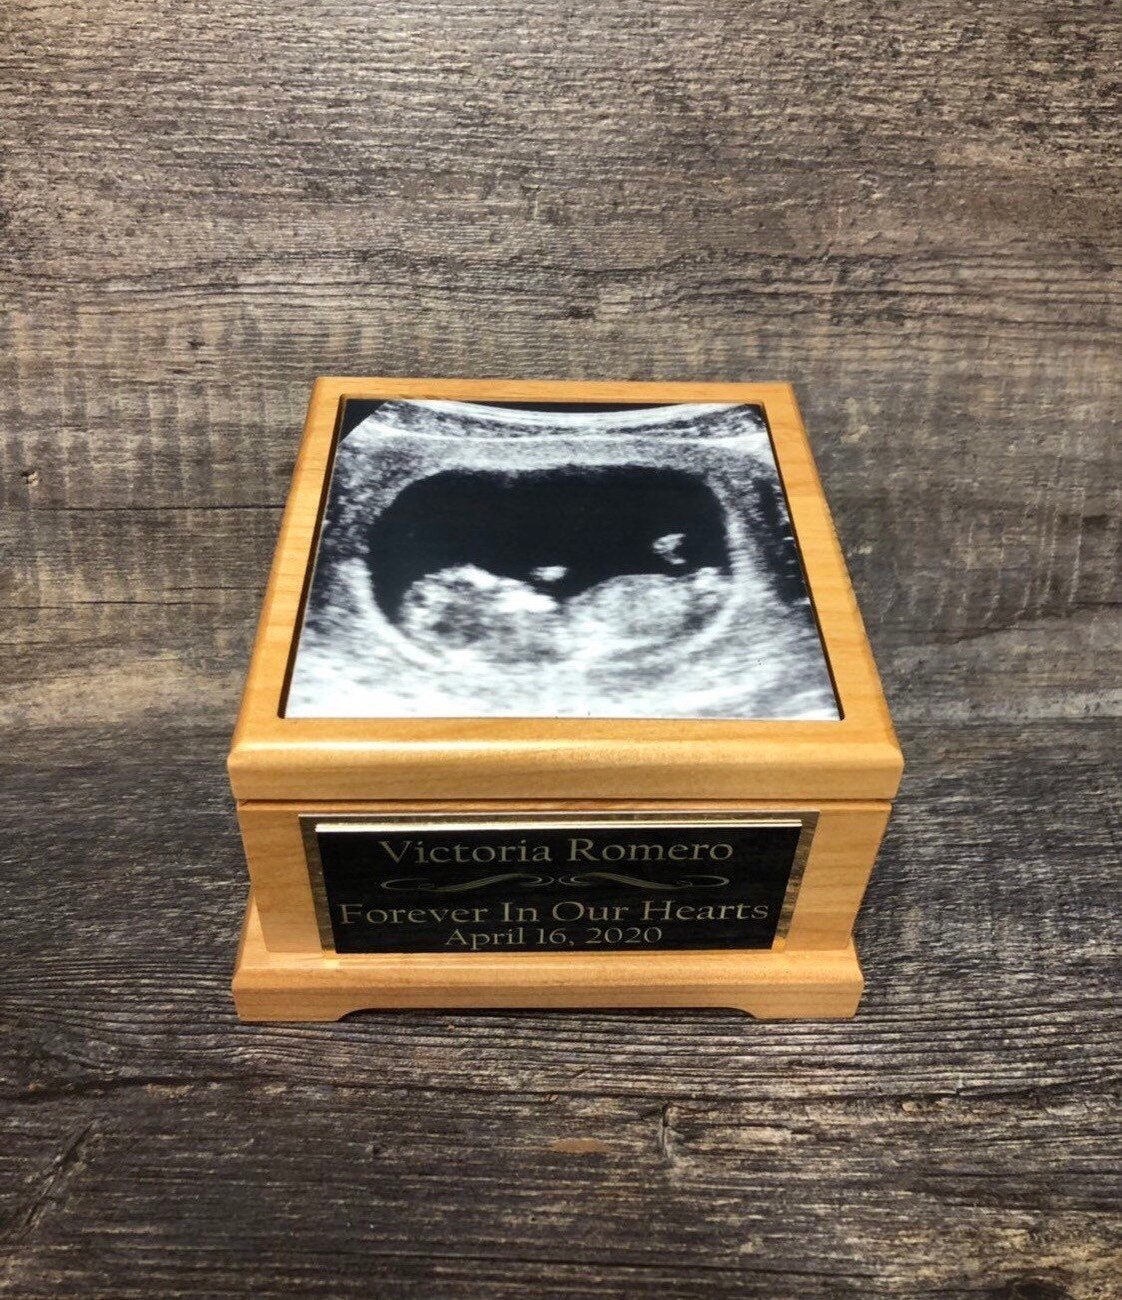 Miscarriage Urn Cremation Urn Baby Loss Memorial Keepsake Urn For Ashes Infant Urn Ultrasound Photo & Personalized Engraved Memorial Gift